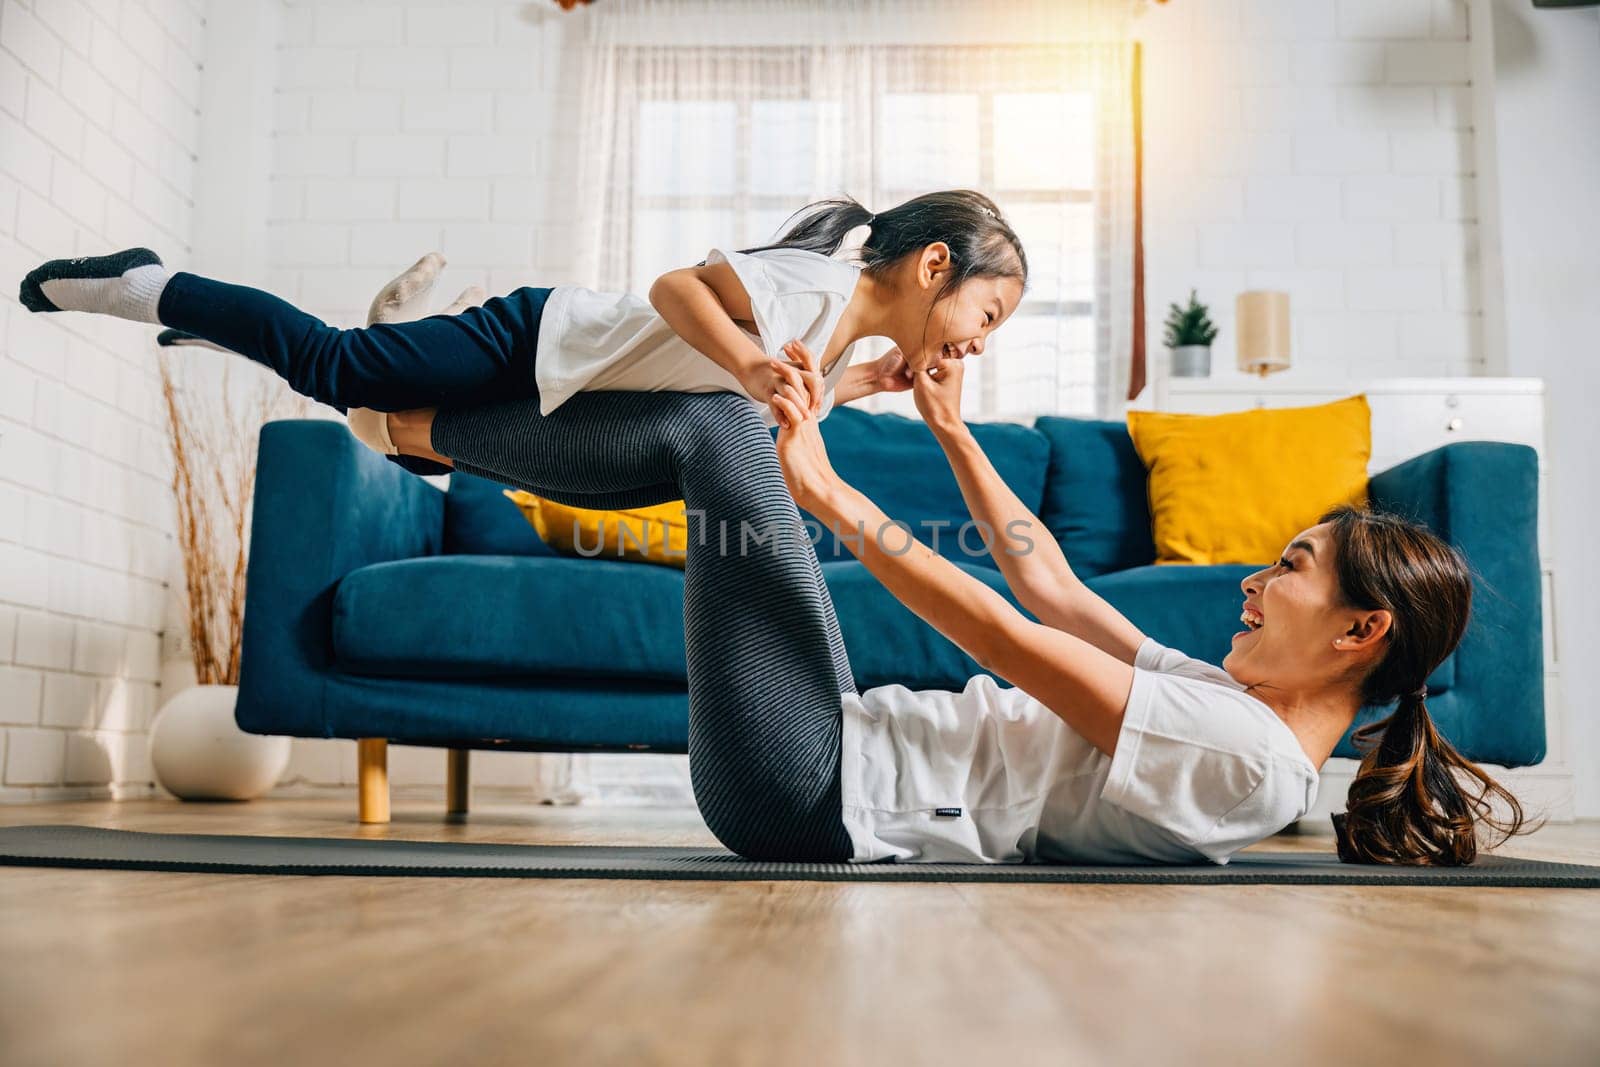 A harmonious family practices the little bird posture in yoga at home. The mother's support and the daughter's joy create a joyful and harmonious moment filled with trust happiness and togetherness.